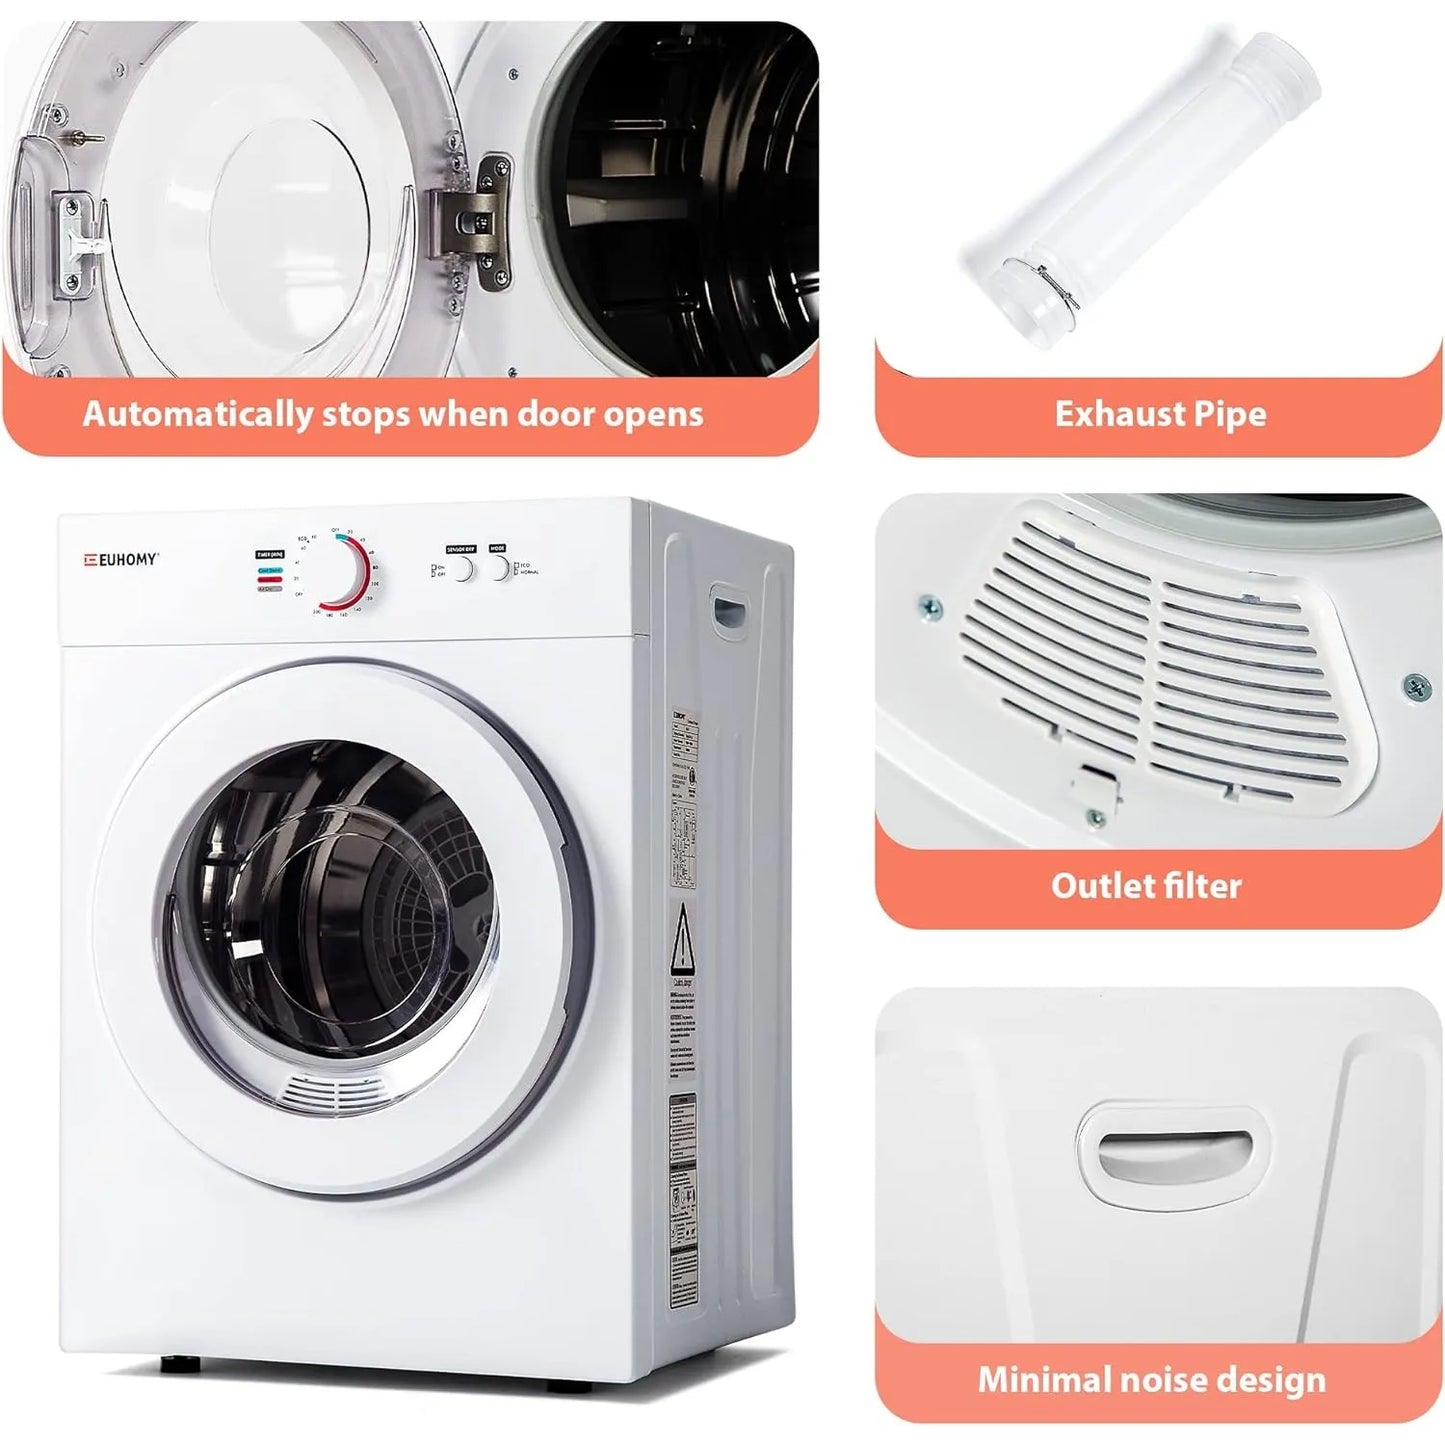 Compact Dryer
Portable Clothes Dryer
Exhaust Duct
Stainless Steel Liner
Small Dryer Machine